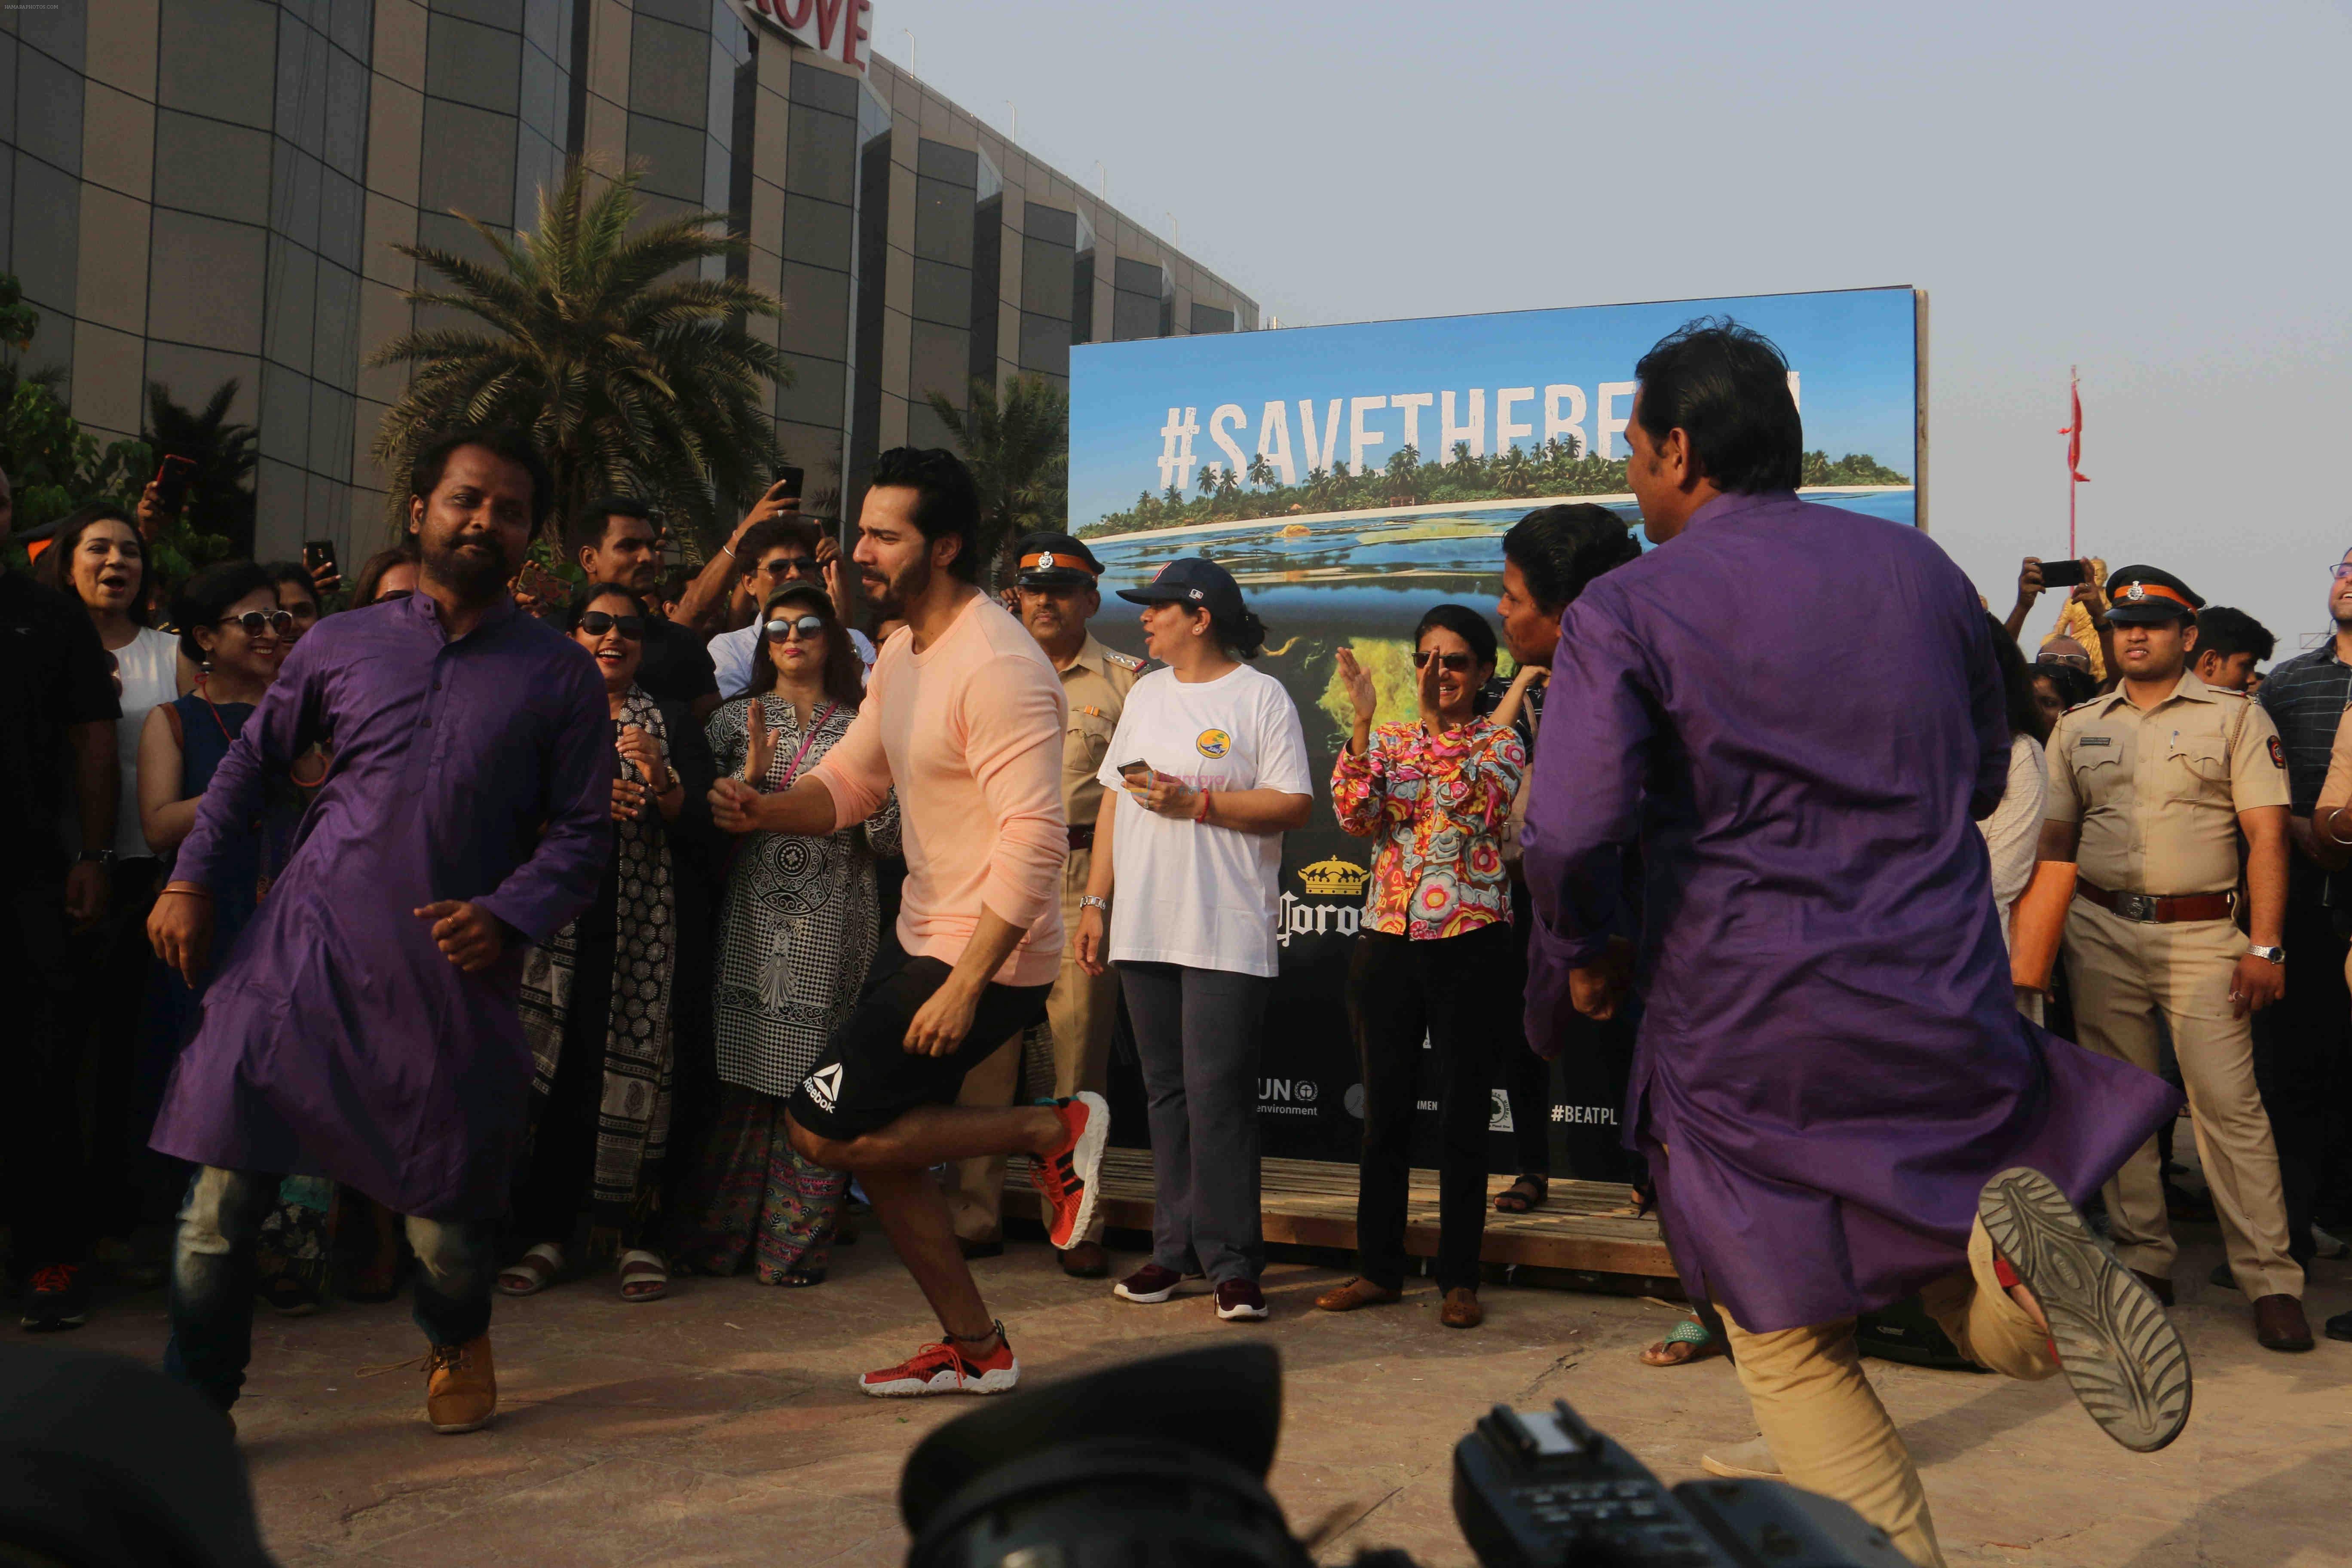 Varun Dhawan takes part in beach clean-up drive on the occasion of World environment day at juhu beach on 5th June 2018